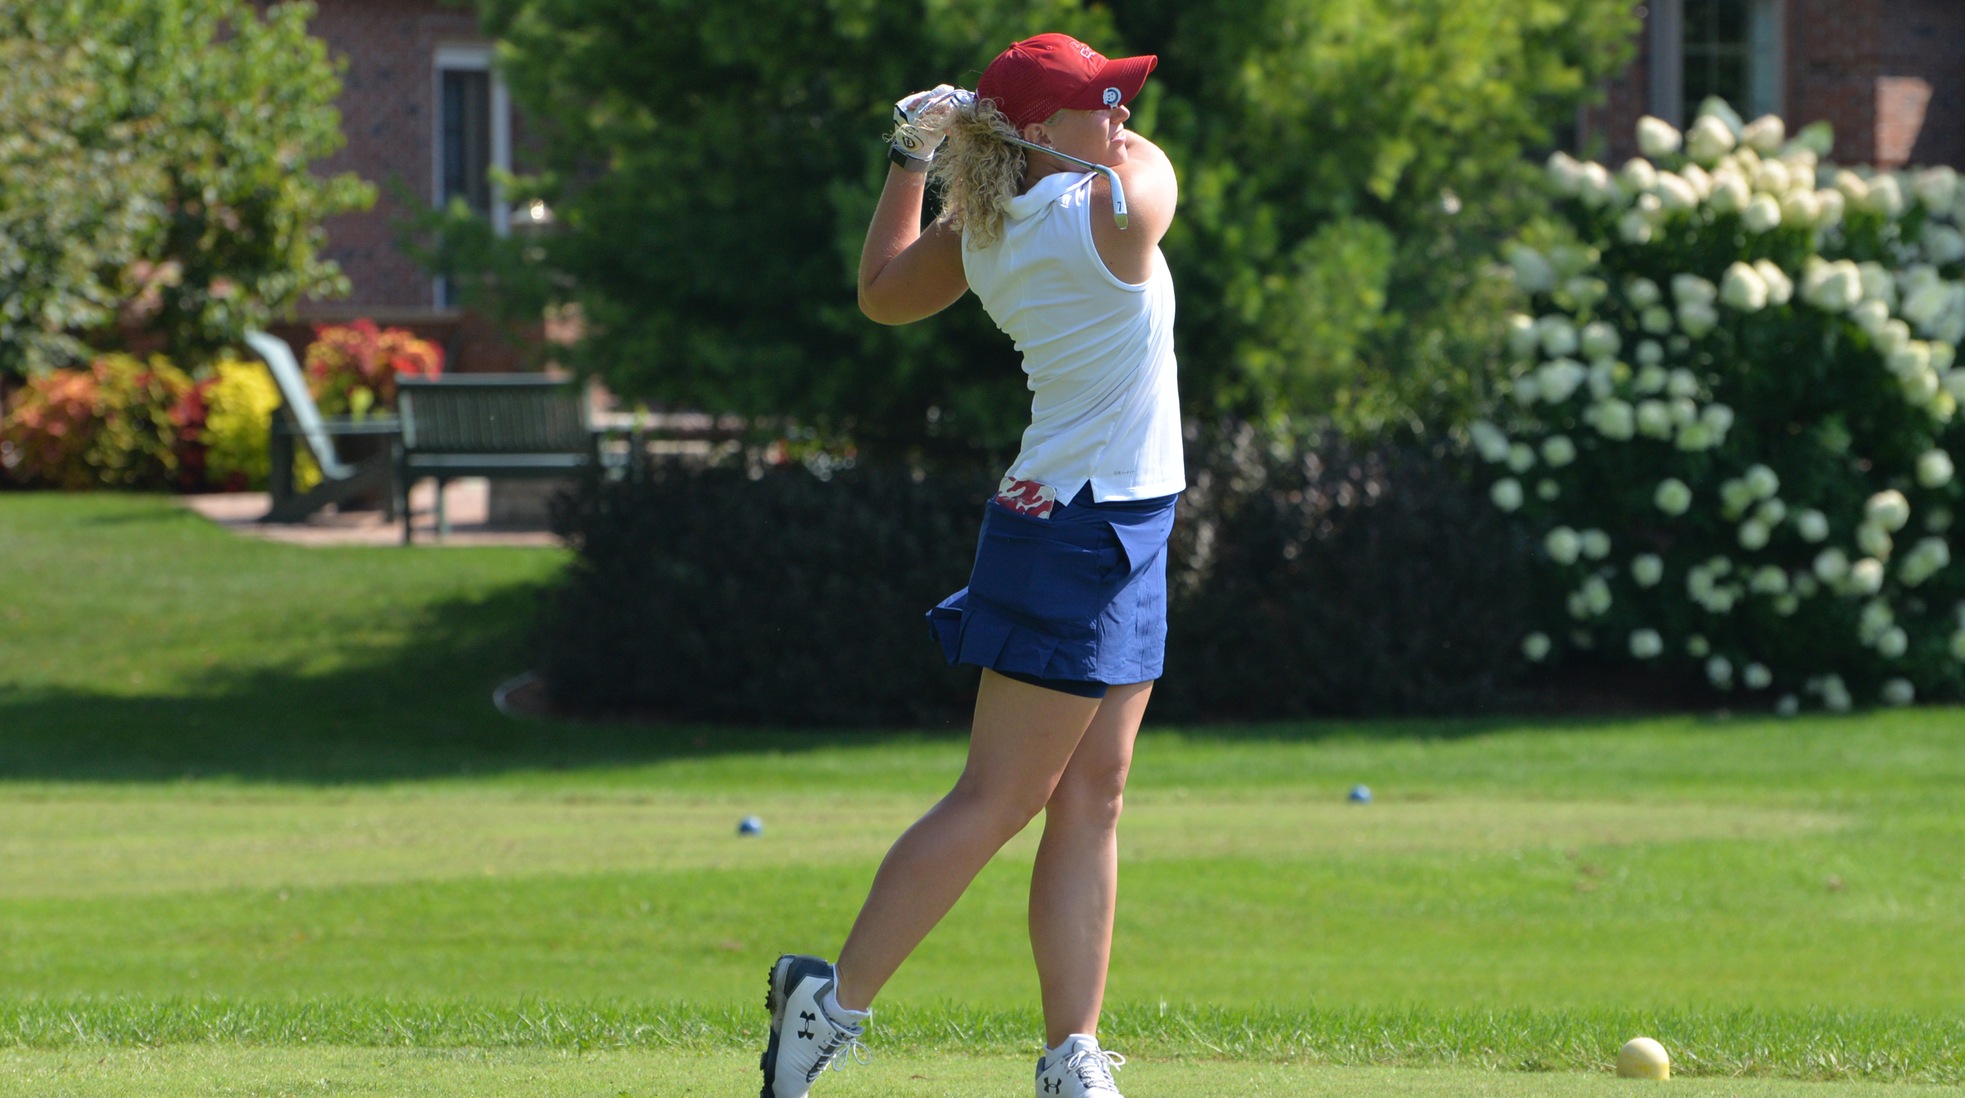 Women's Golf leads by two strokes after round one at Bulldog Fall Invitational